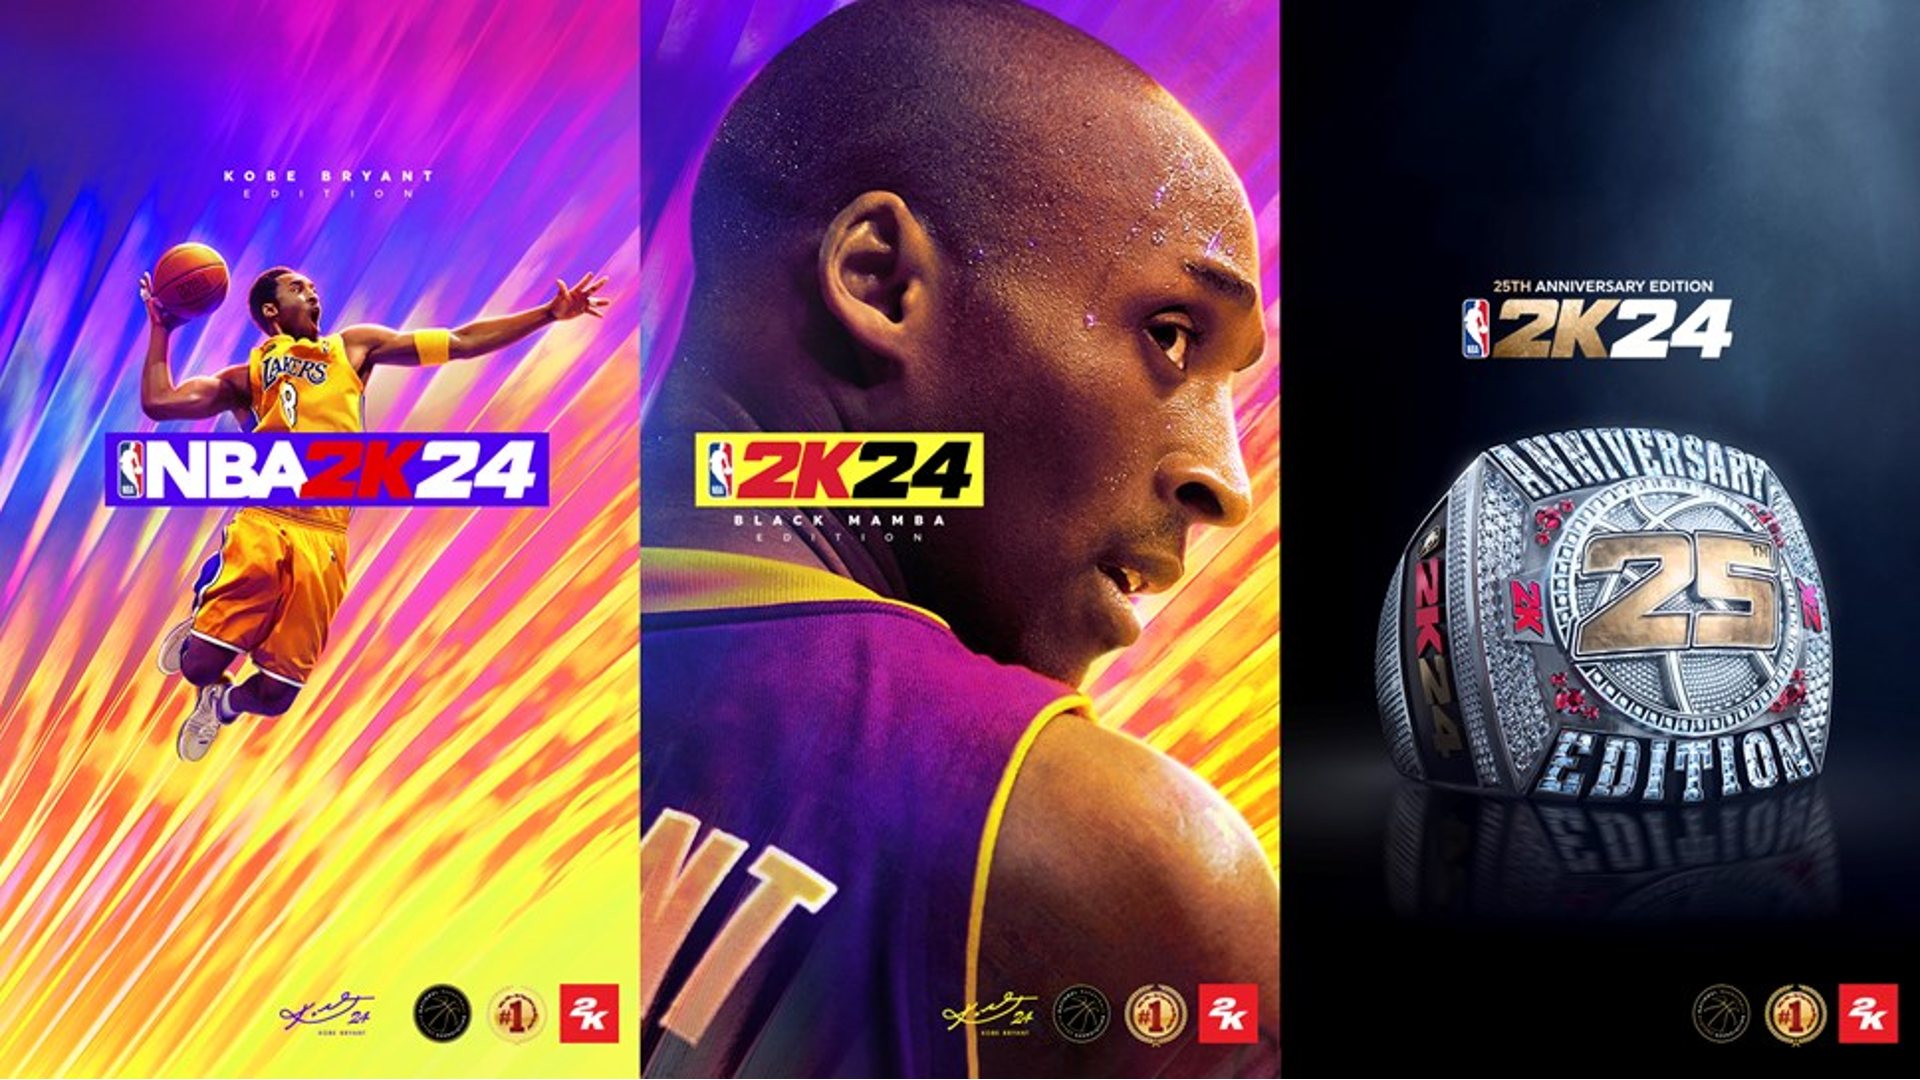 NBA 2K24 Release Date: The base cover, Black Mamba edition cover, and 25th Anniversary cover of NBA 2k24 can be seen